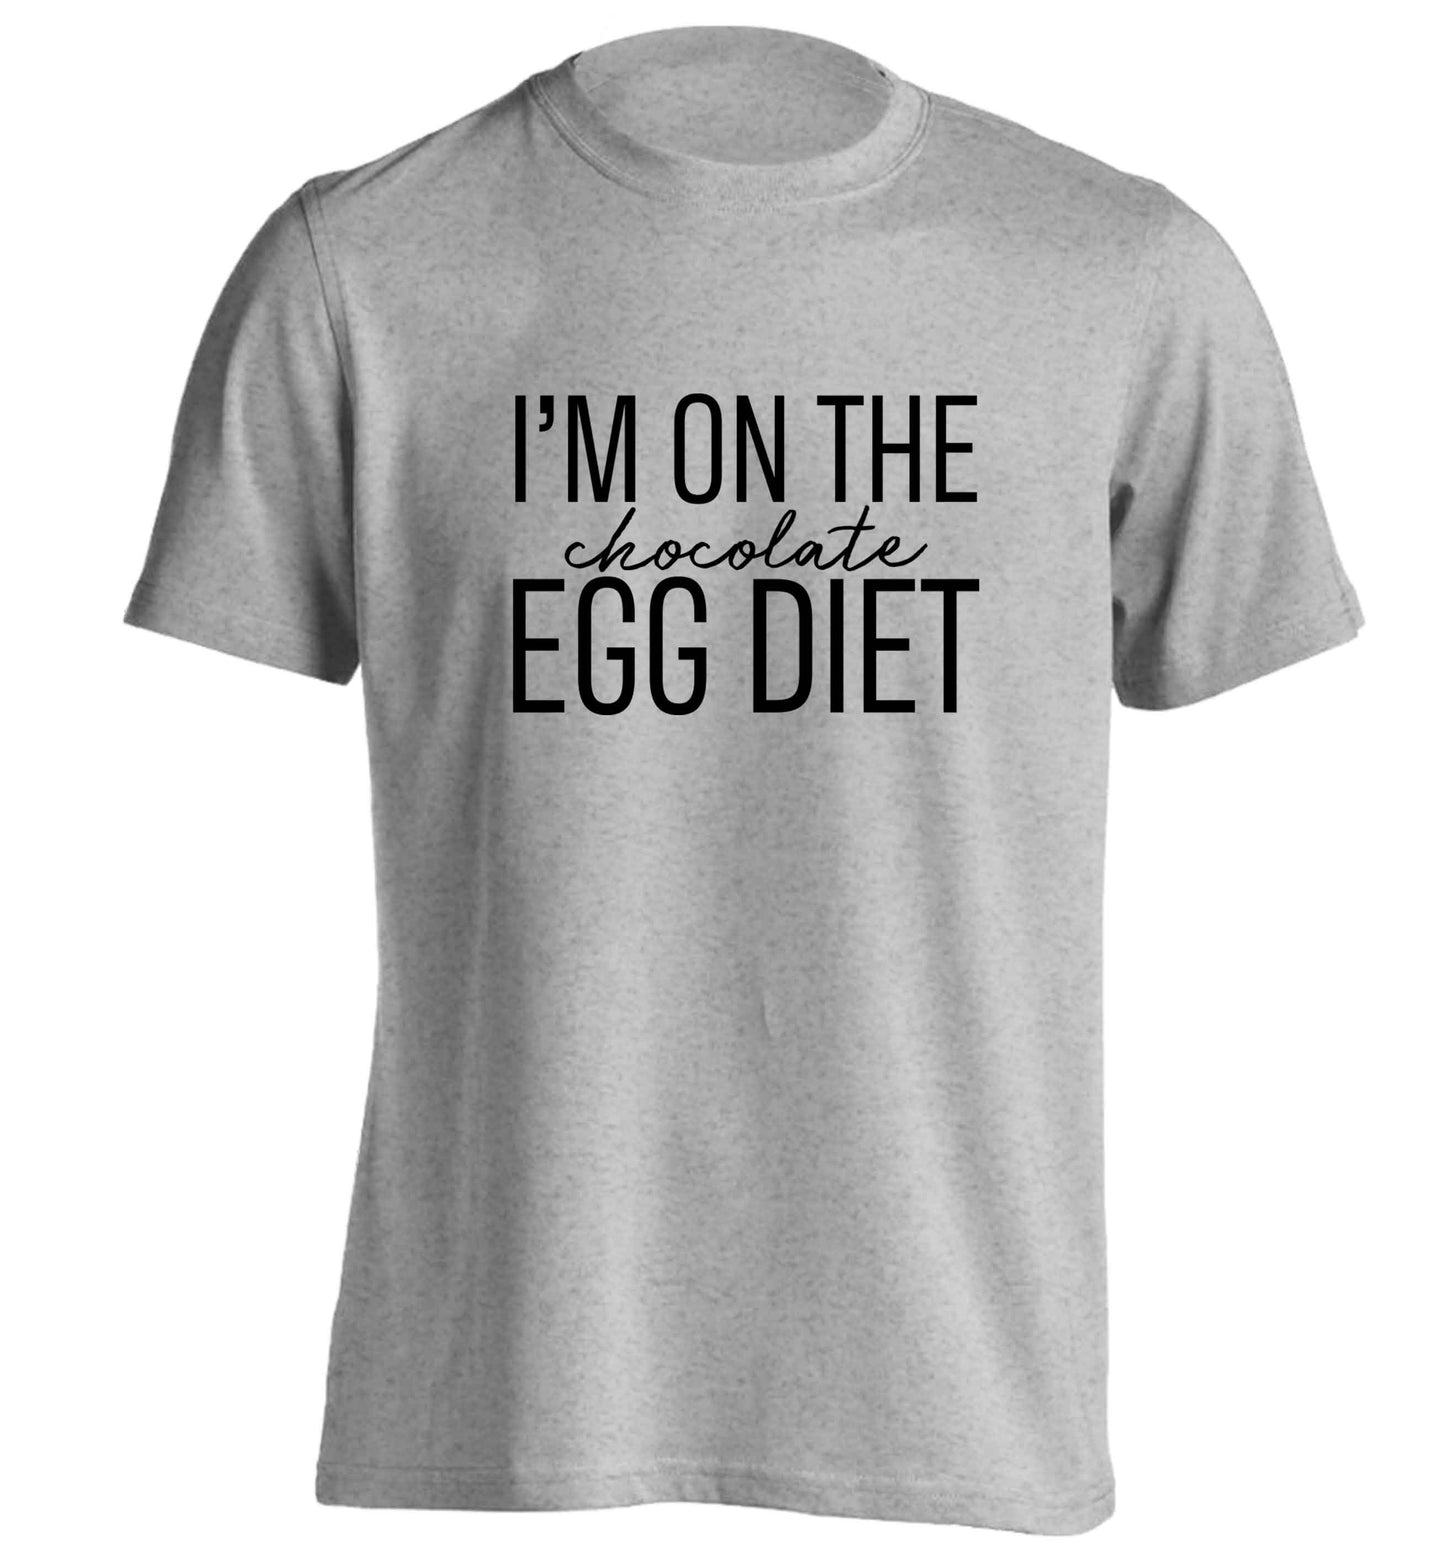 I'm on the chocolate egg diet adults unisex grey Tshirt 2XL